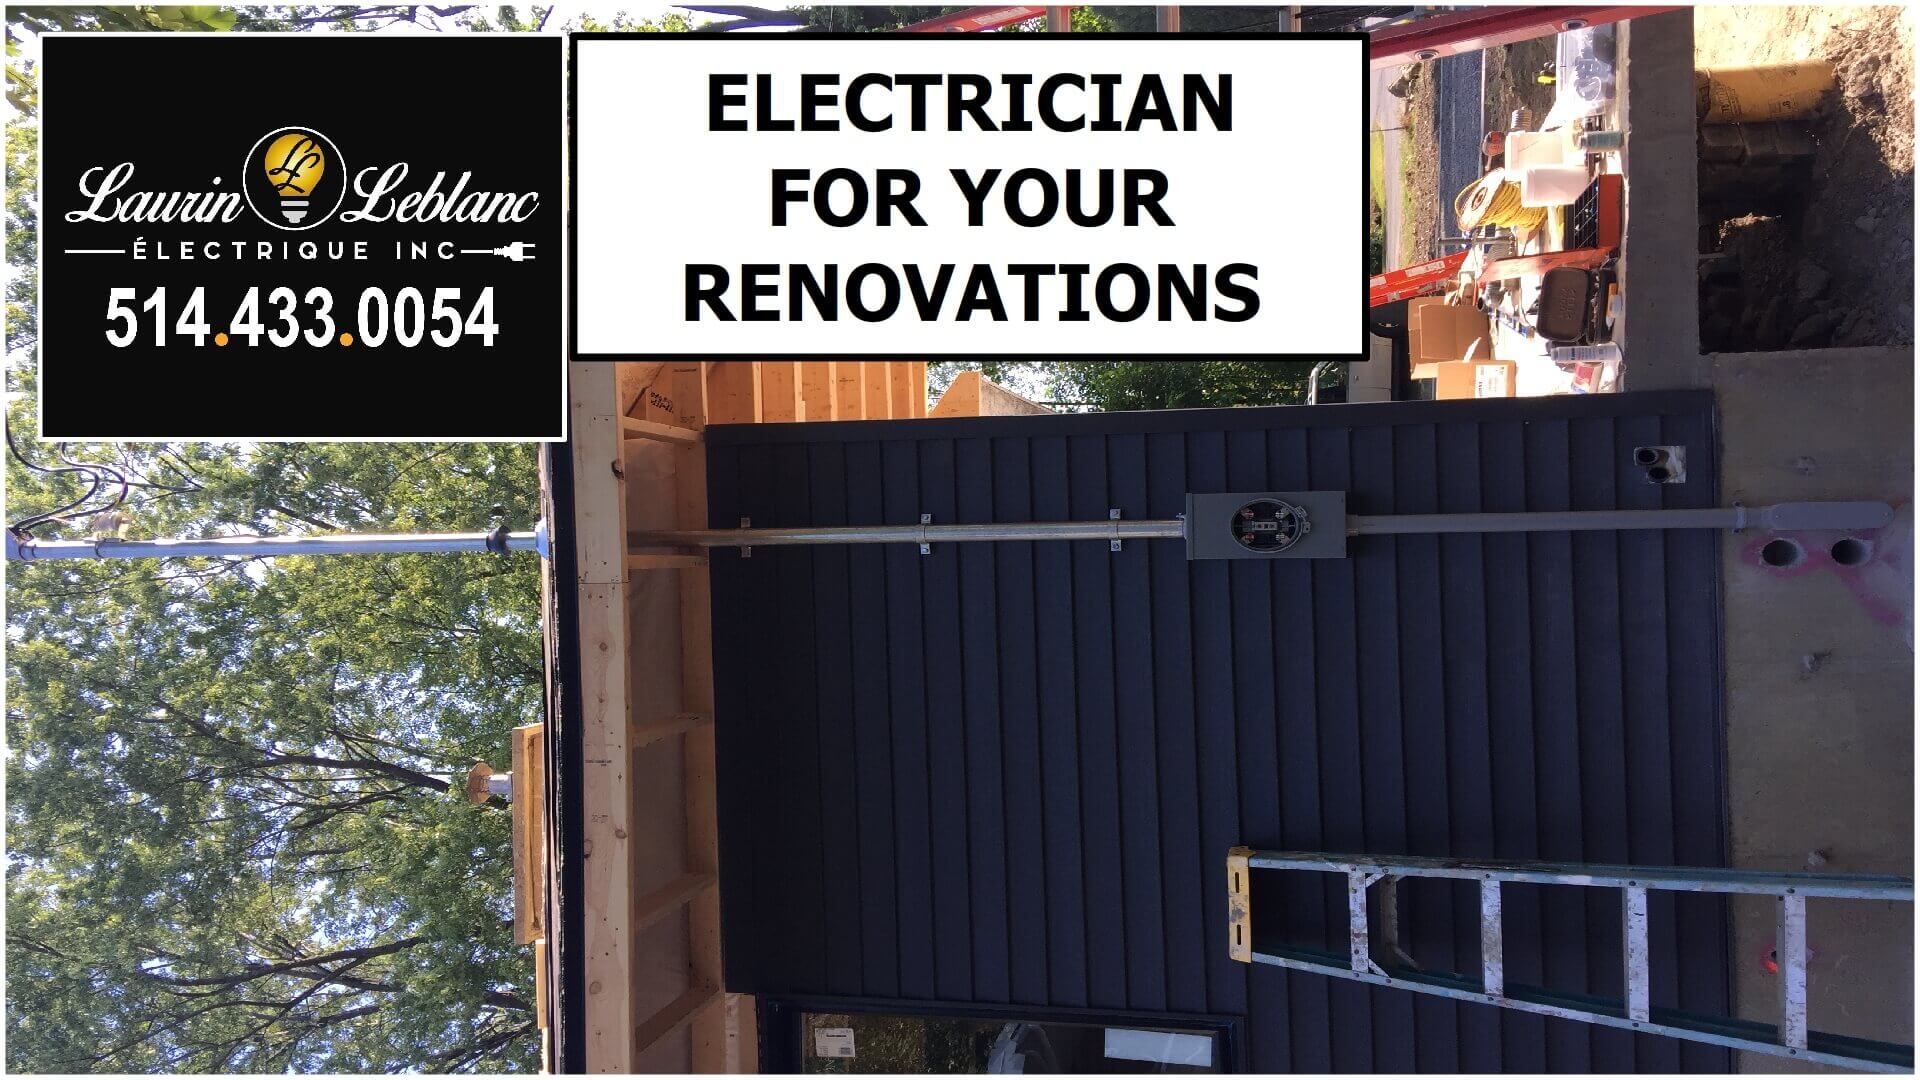 Electrician Renovations in Senneville